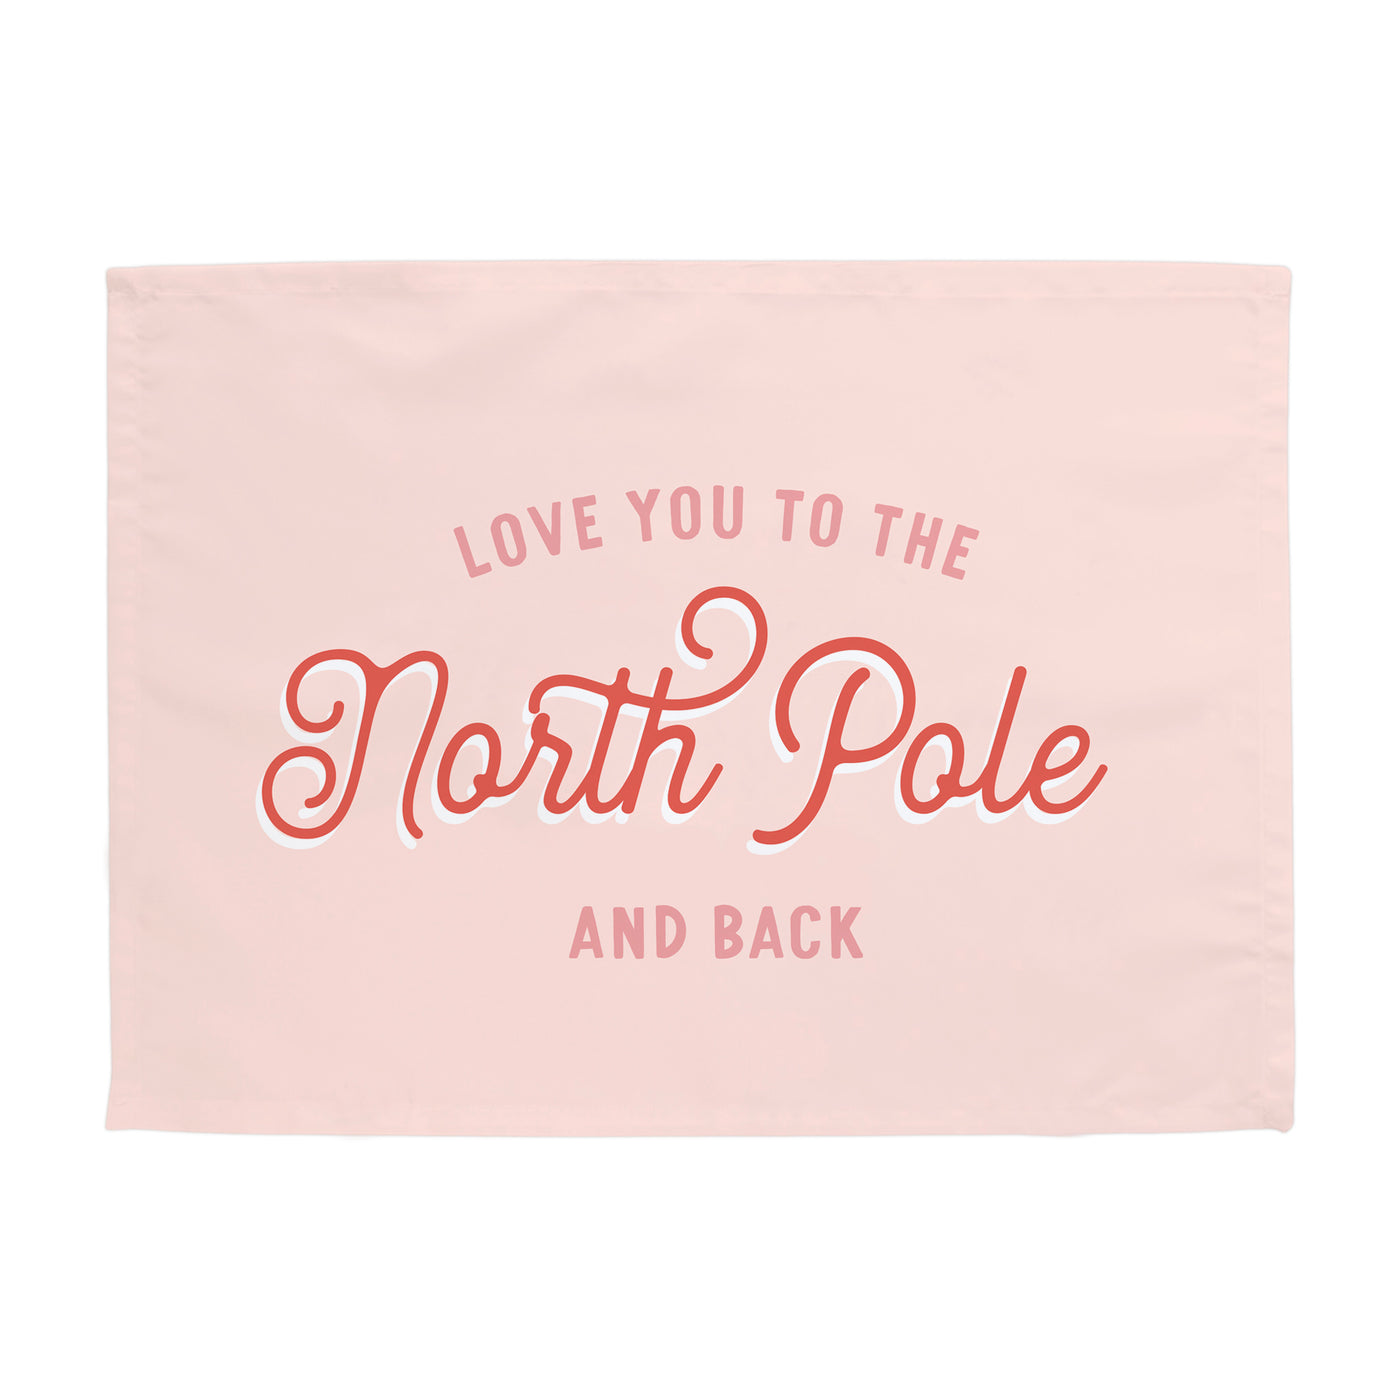 {Pink + Red} Love You To The North Pole Banner